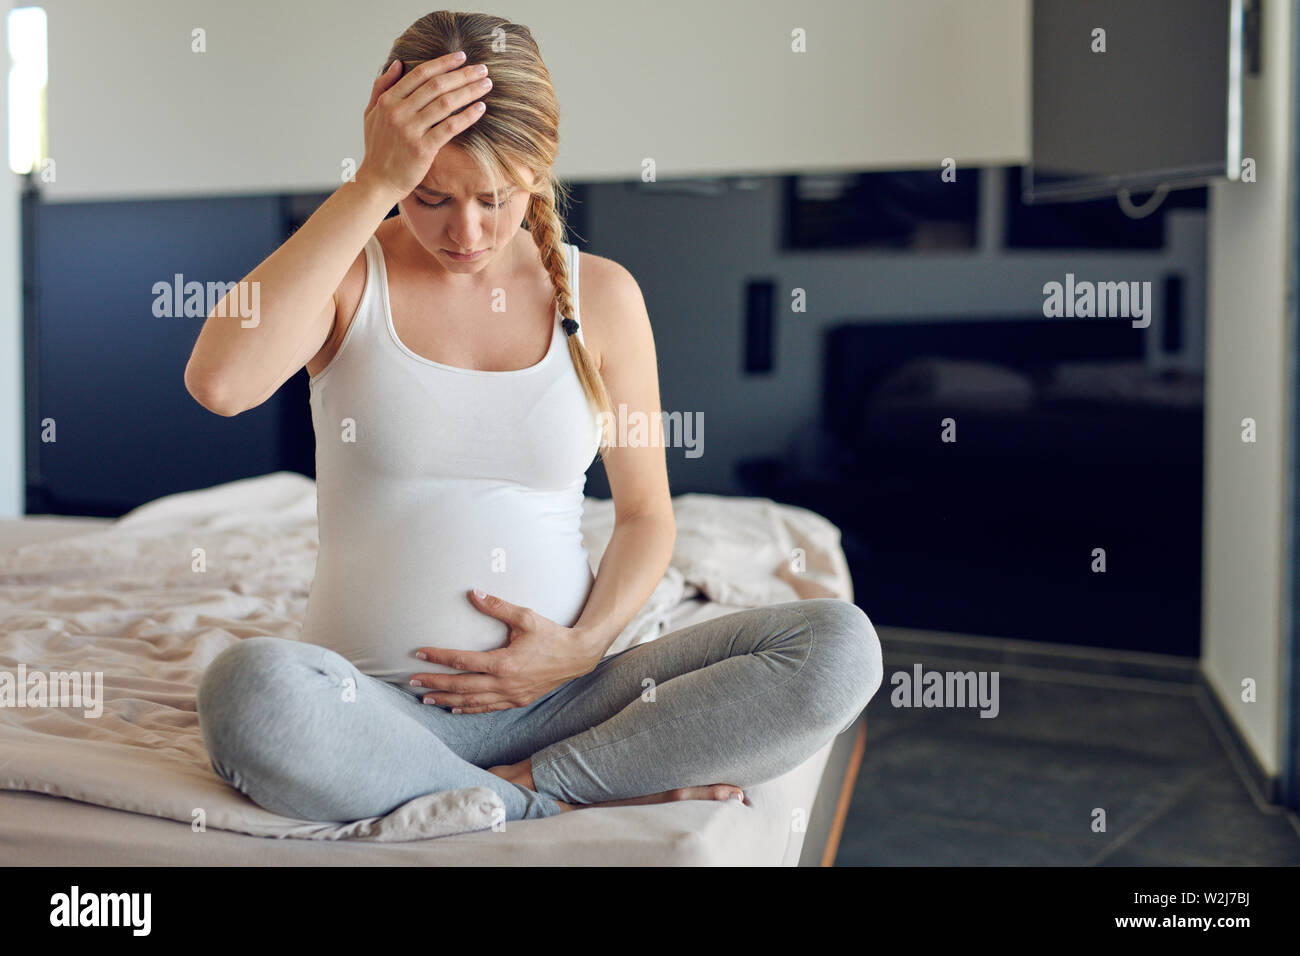 Troubled heavily pregnant young woman sitting cross legged on a bed cradling her swollen abdomen and clutching her head looking down with a serious ex Stock Photo